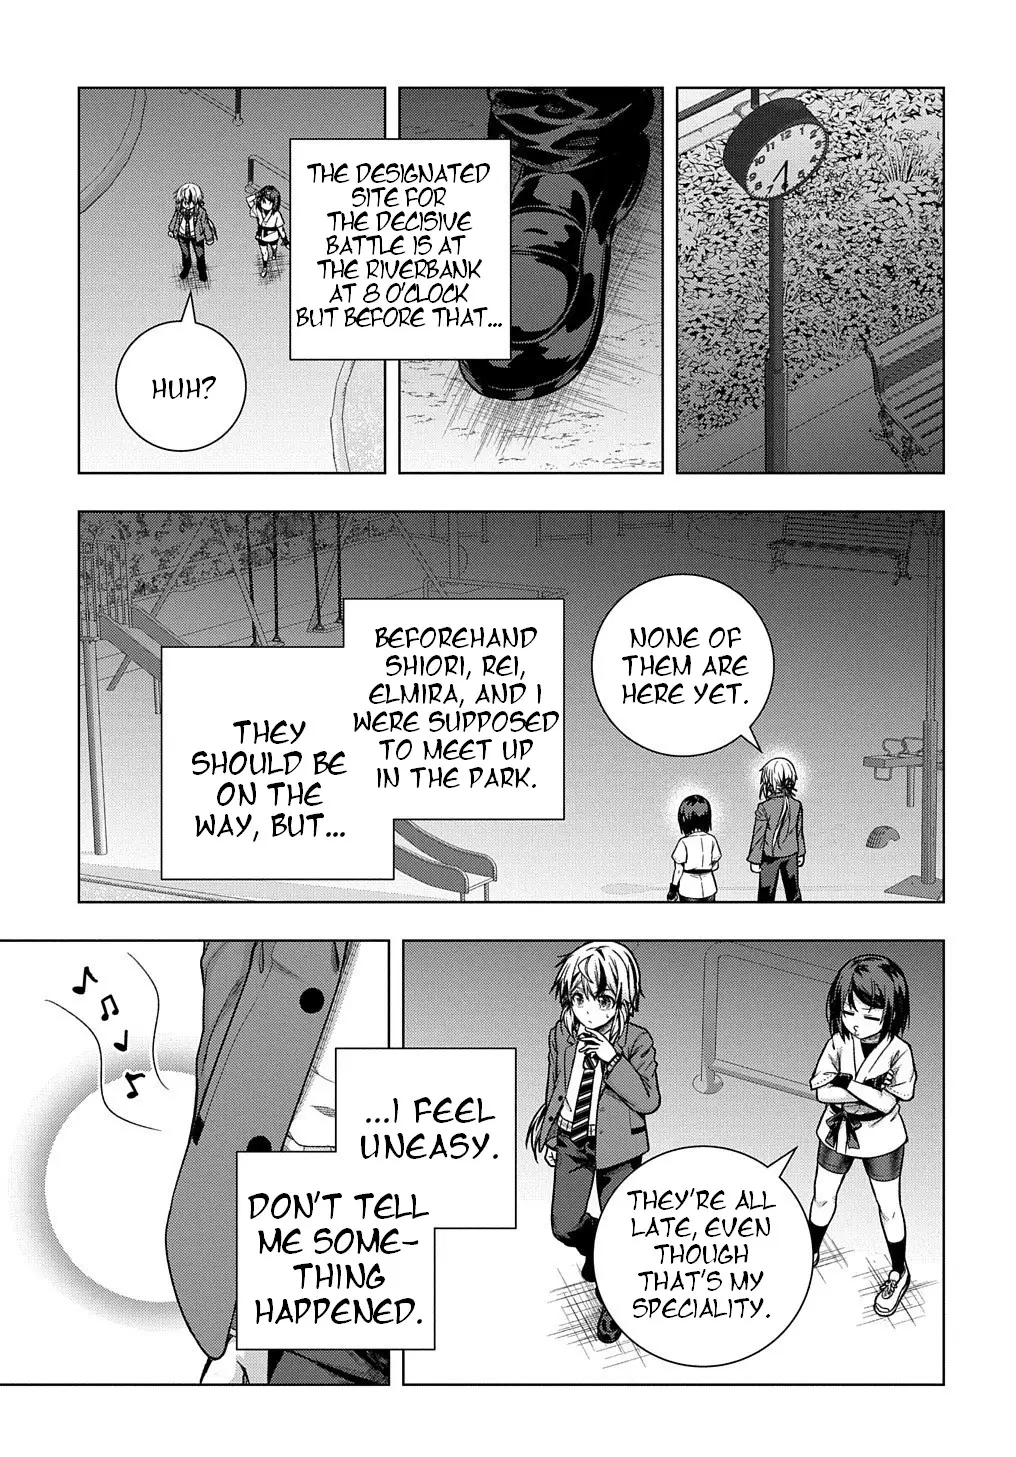 Is It Tough Being A Friend? - 29 page 8-0846c6a5